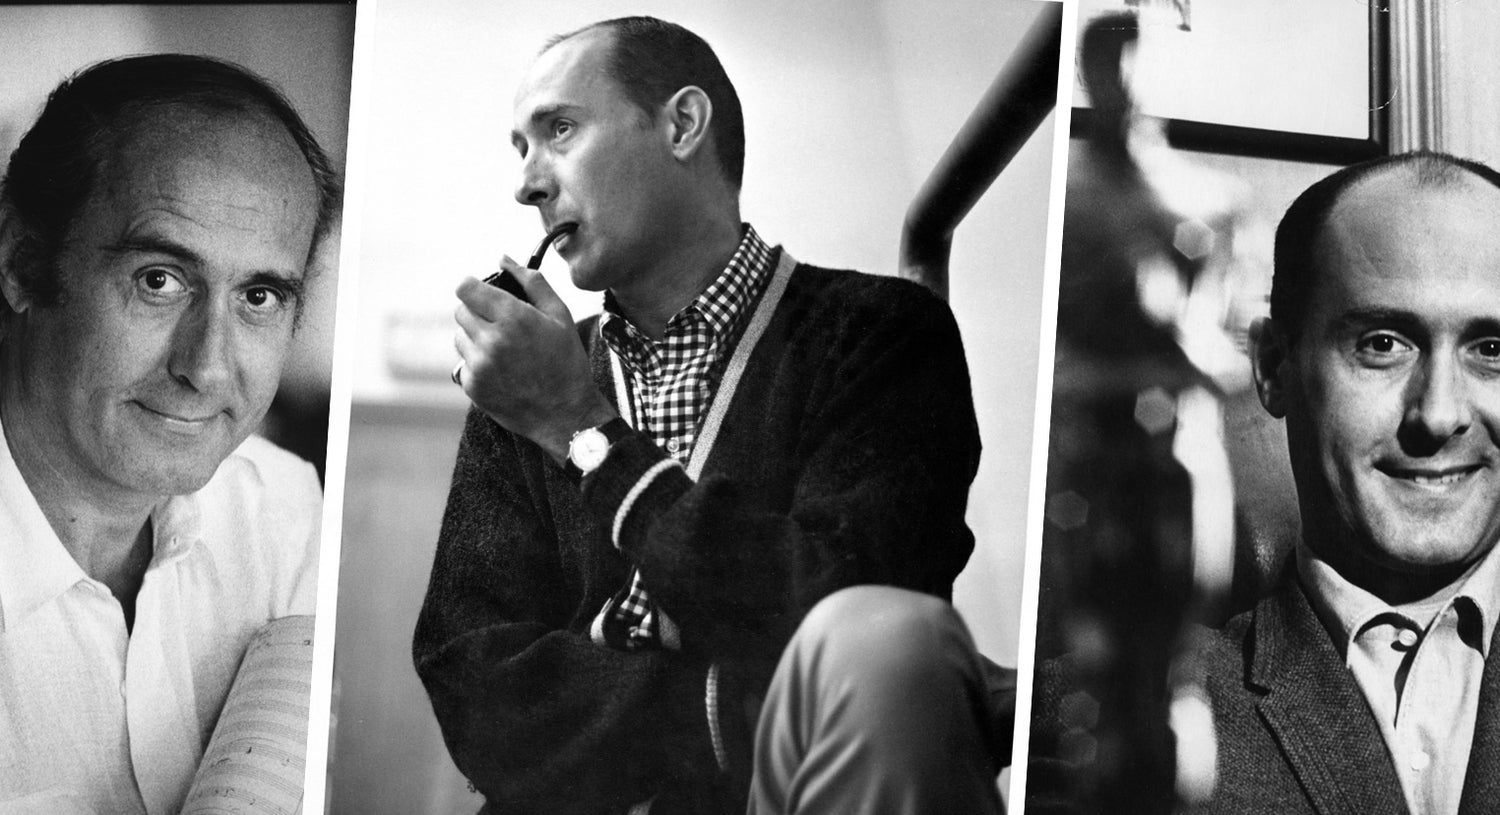 Black and White image of 3 photos of Henry Mancini, one casual, one wear he smokes a pipe and lastly, one where he is sitting at a desk with Oscar Awards in the forefront